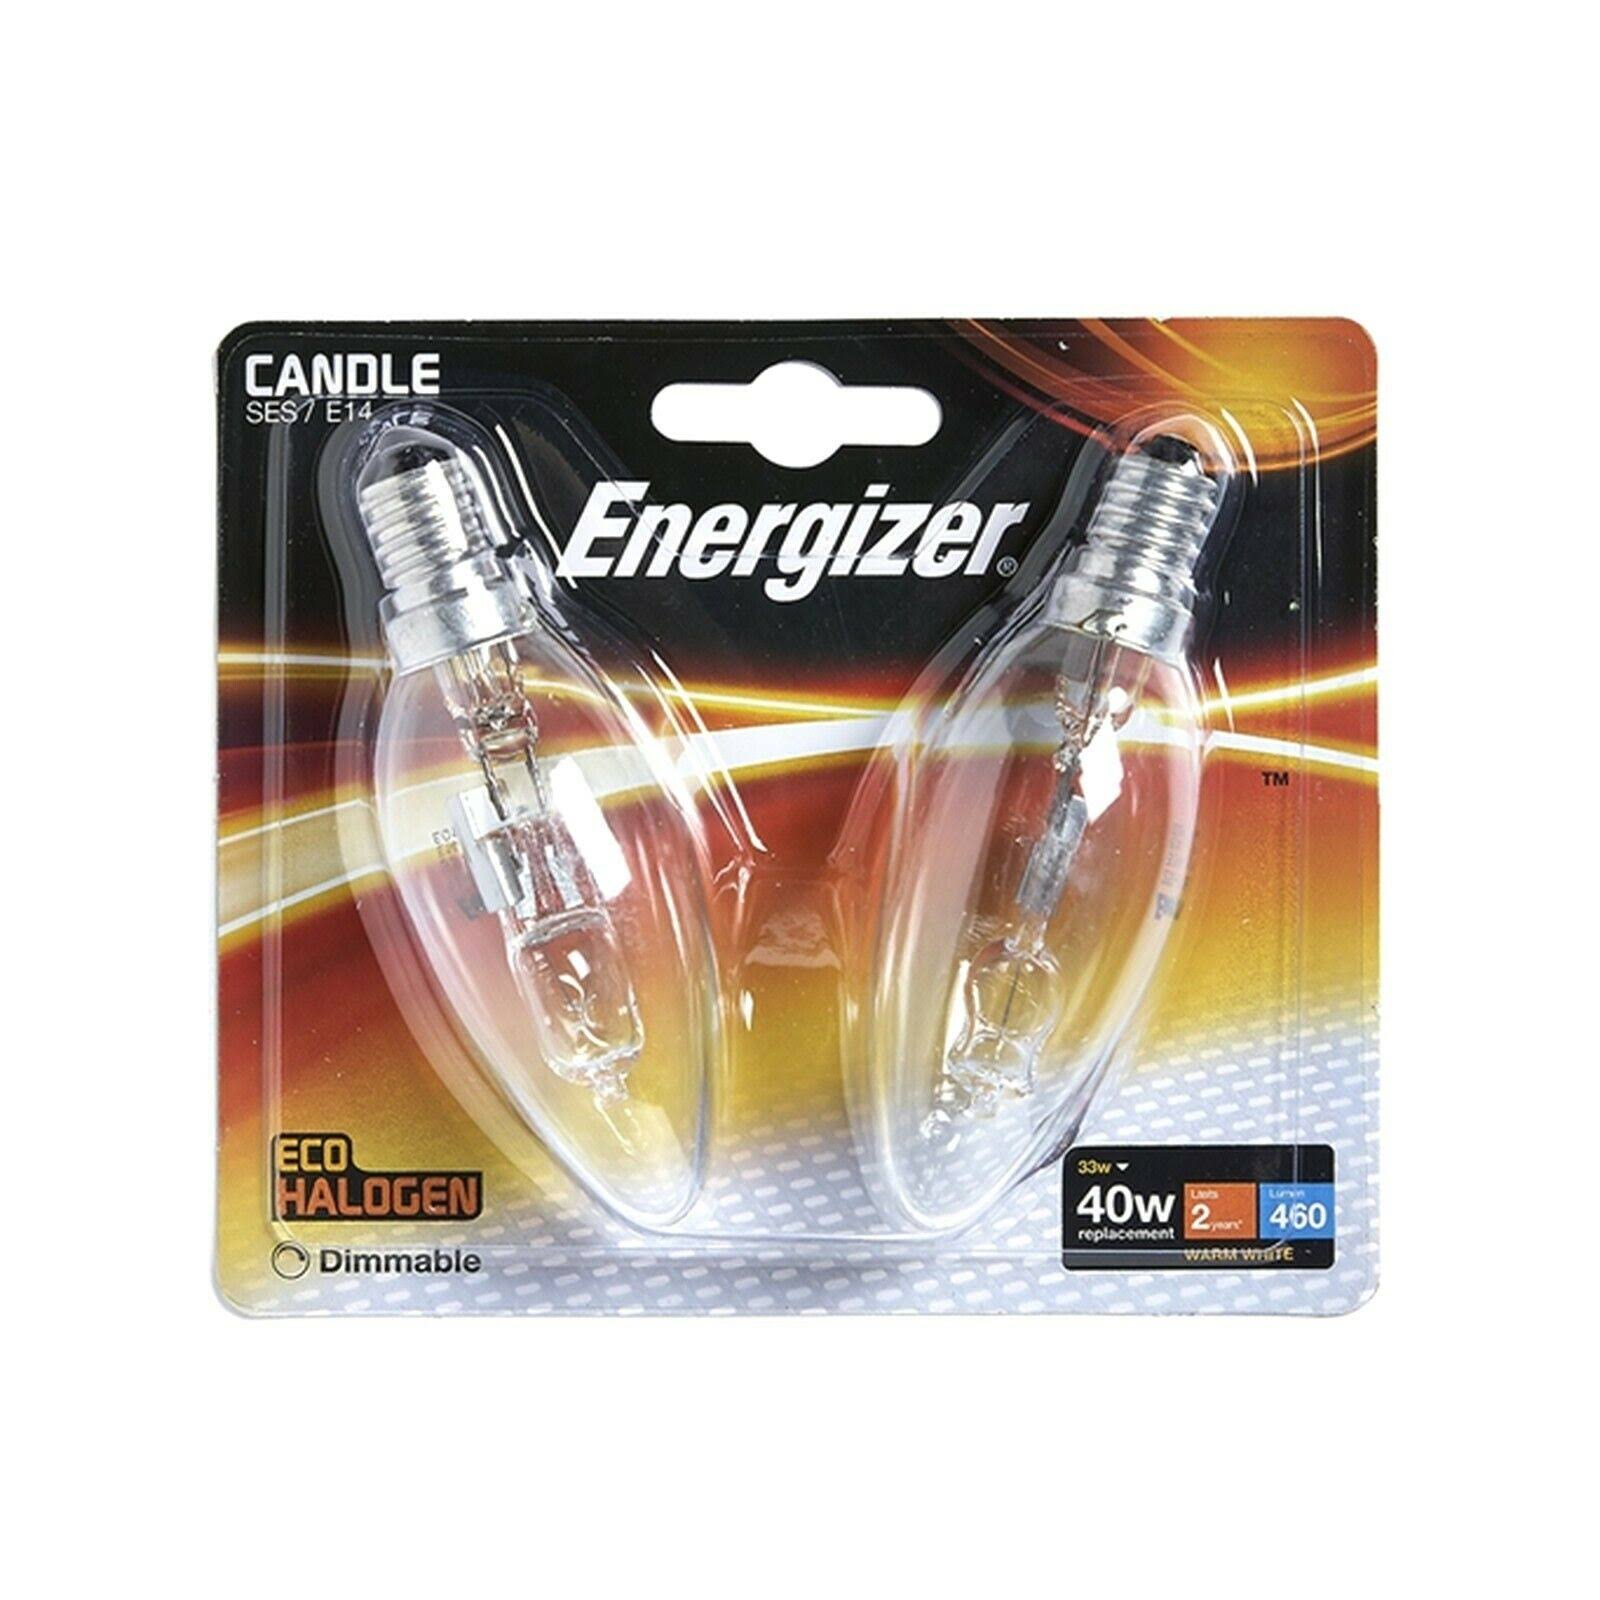 48w Energy Saving Dimmable Halogen Candle SES E14 Pack of 10 